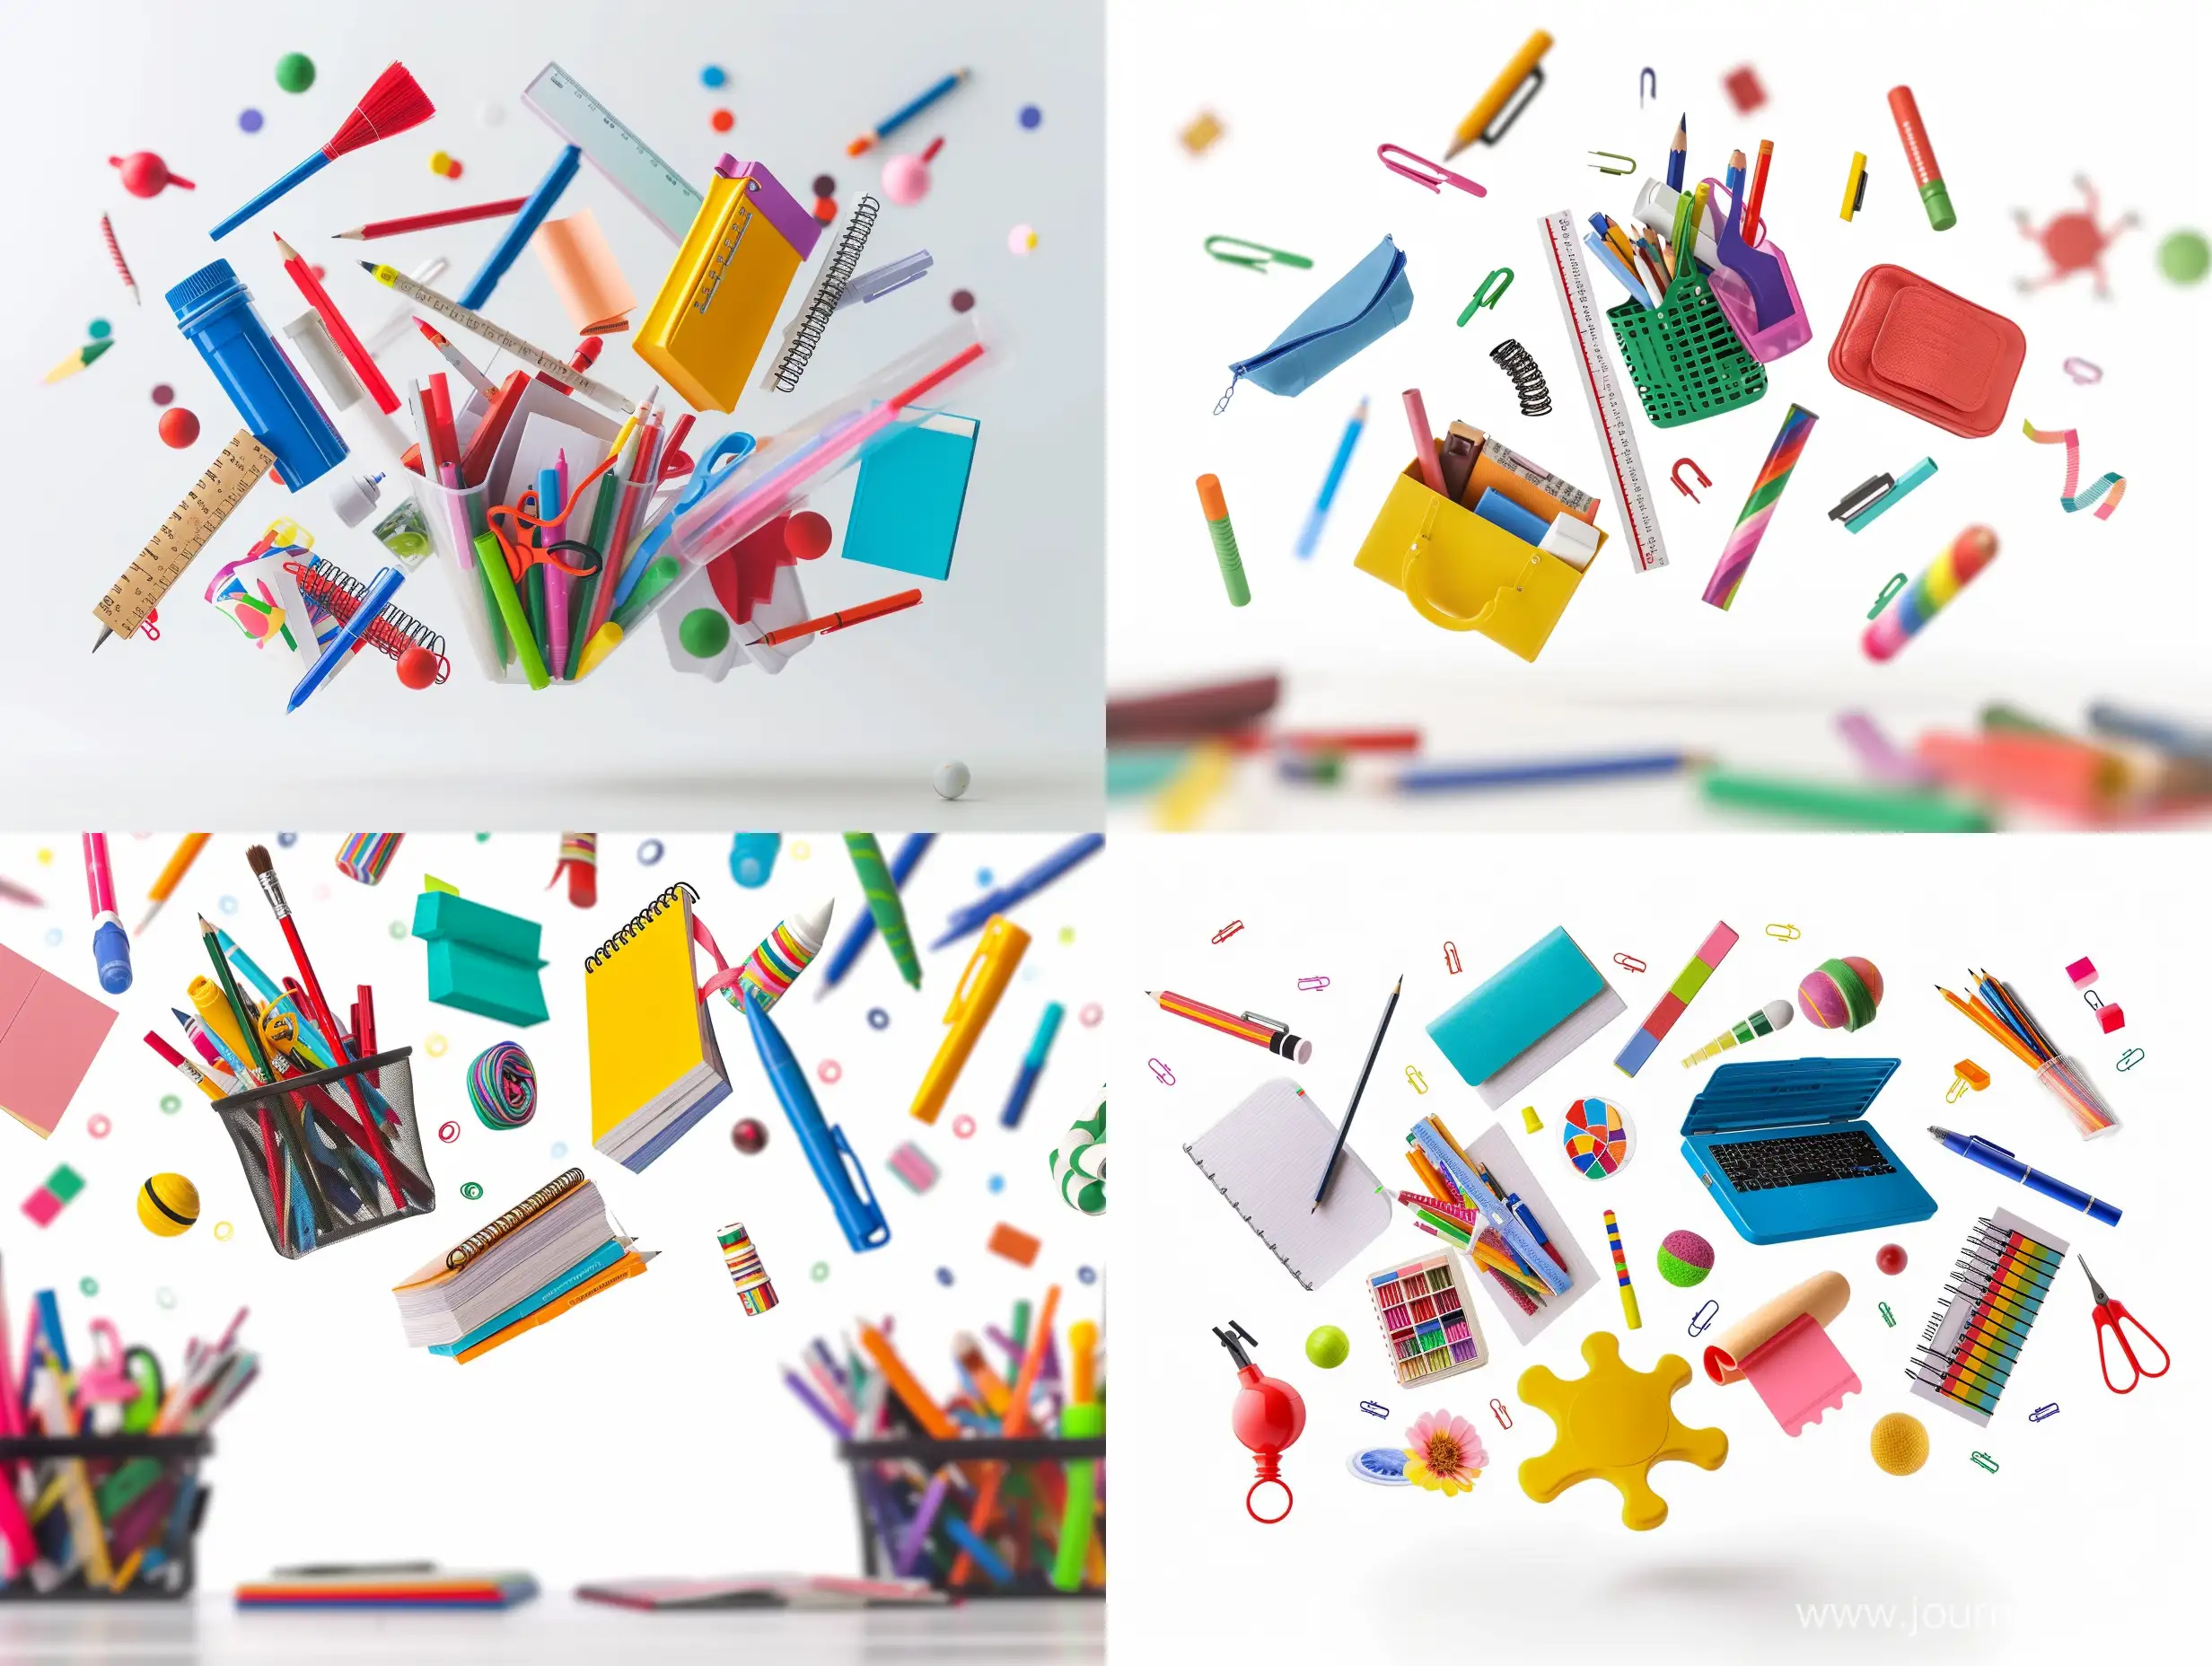 Floating-School-Supplies-in-Air-on-White-Background